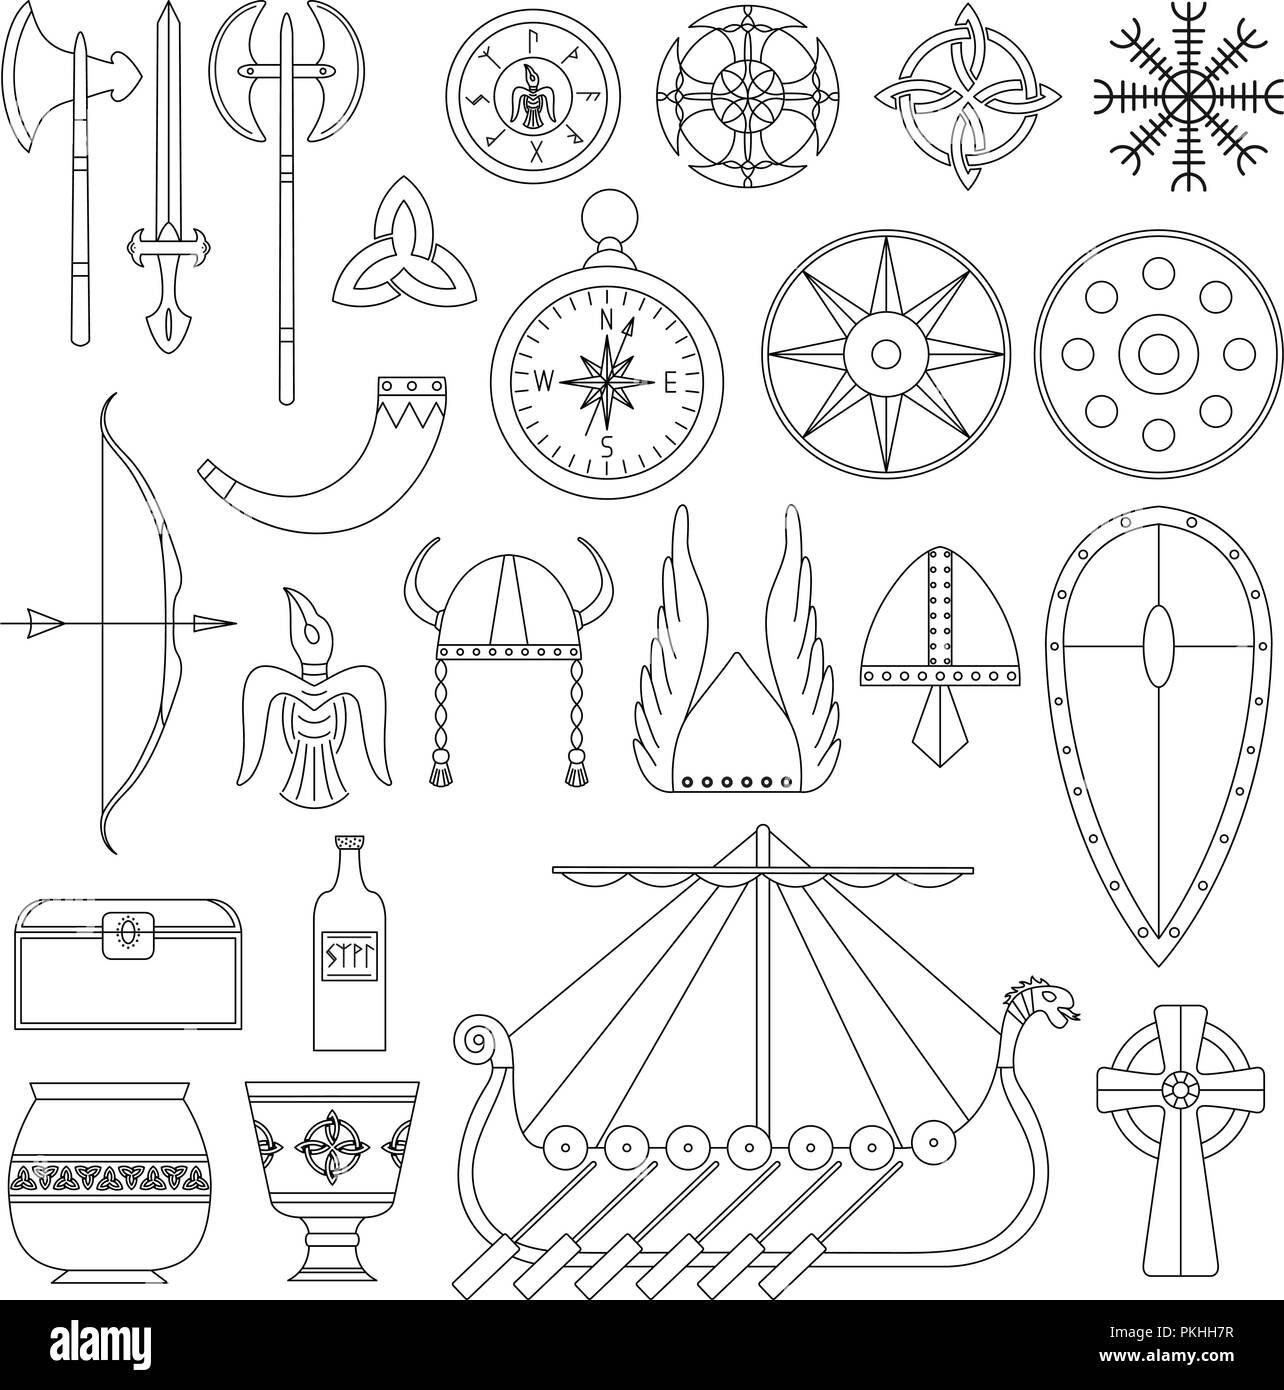 Set of black-and-white vector illustrations for the design of Viking's life. Stock Vector